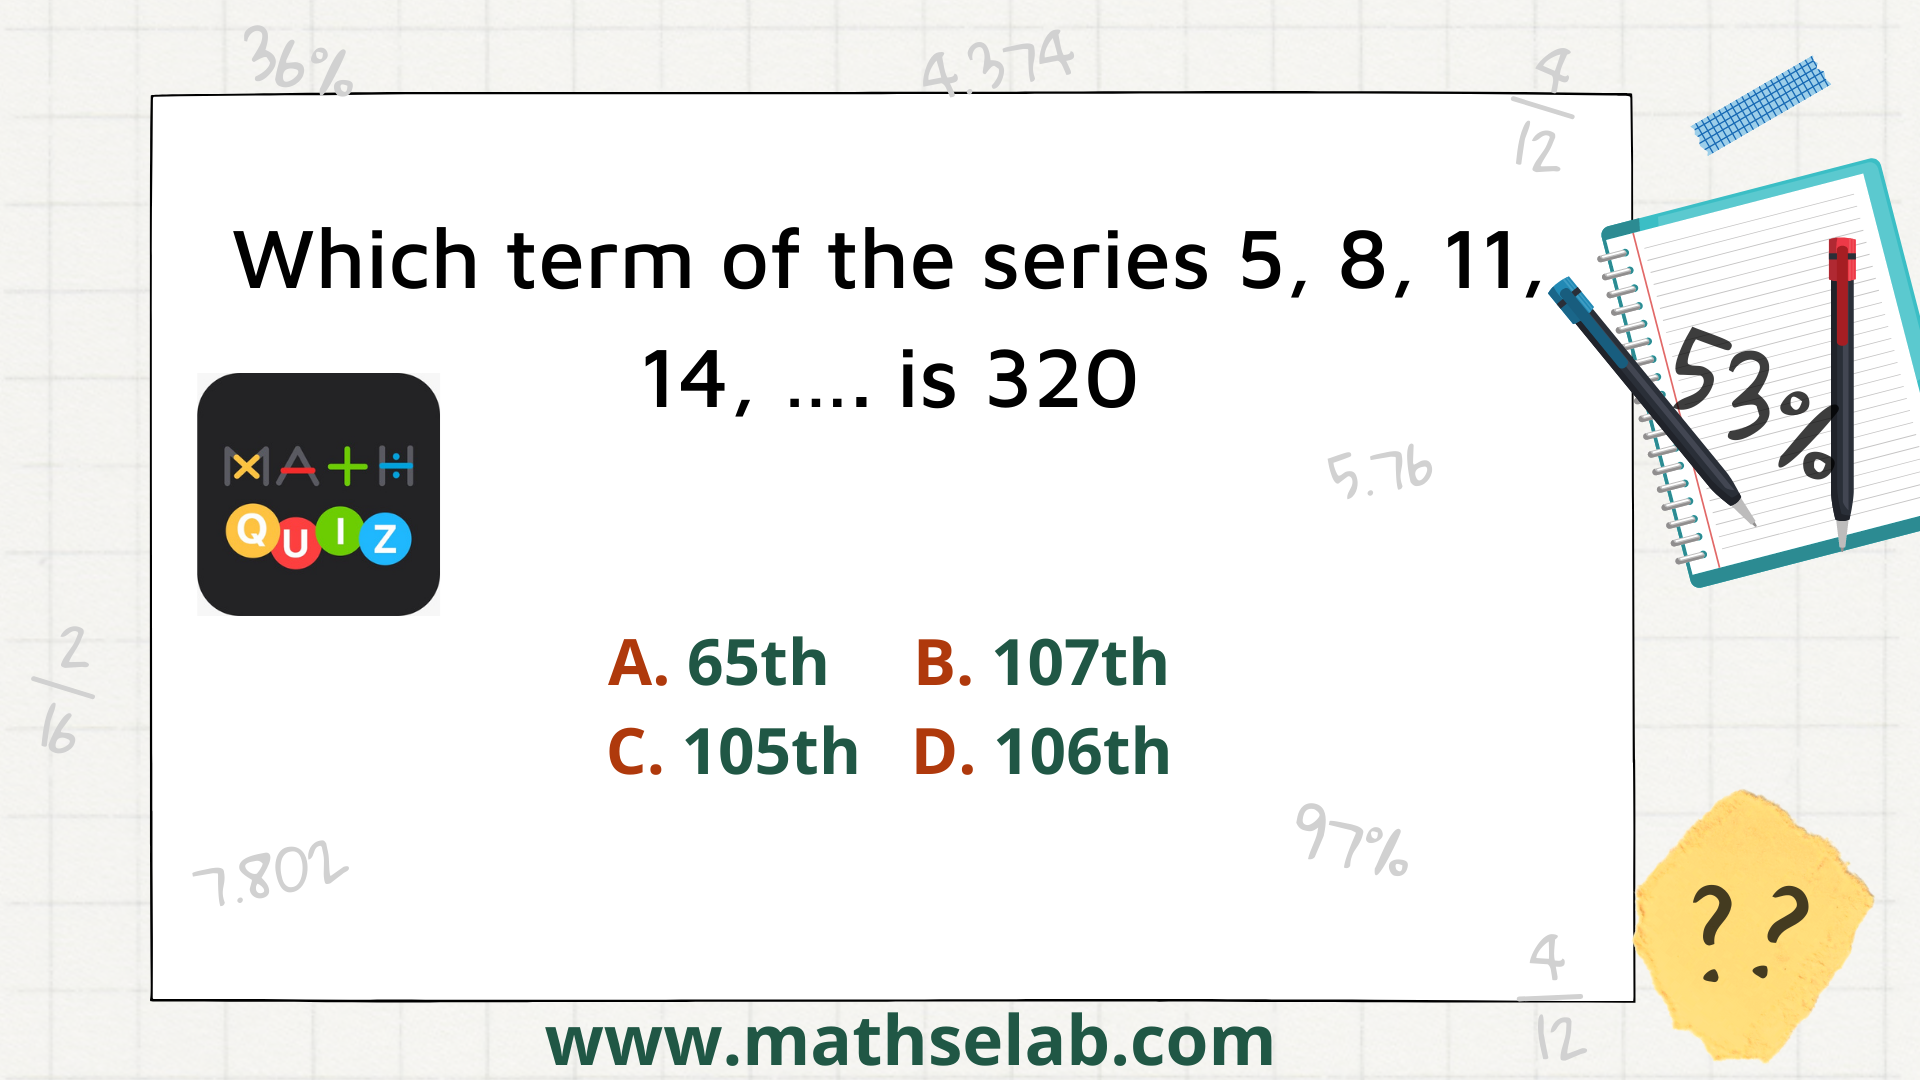 Which term of the series 5, 8, 11, 14, …. is 320